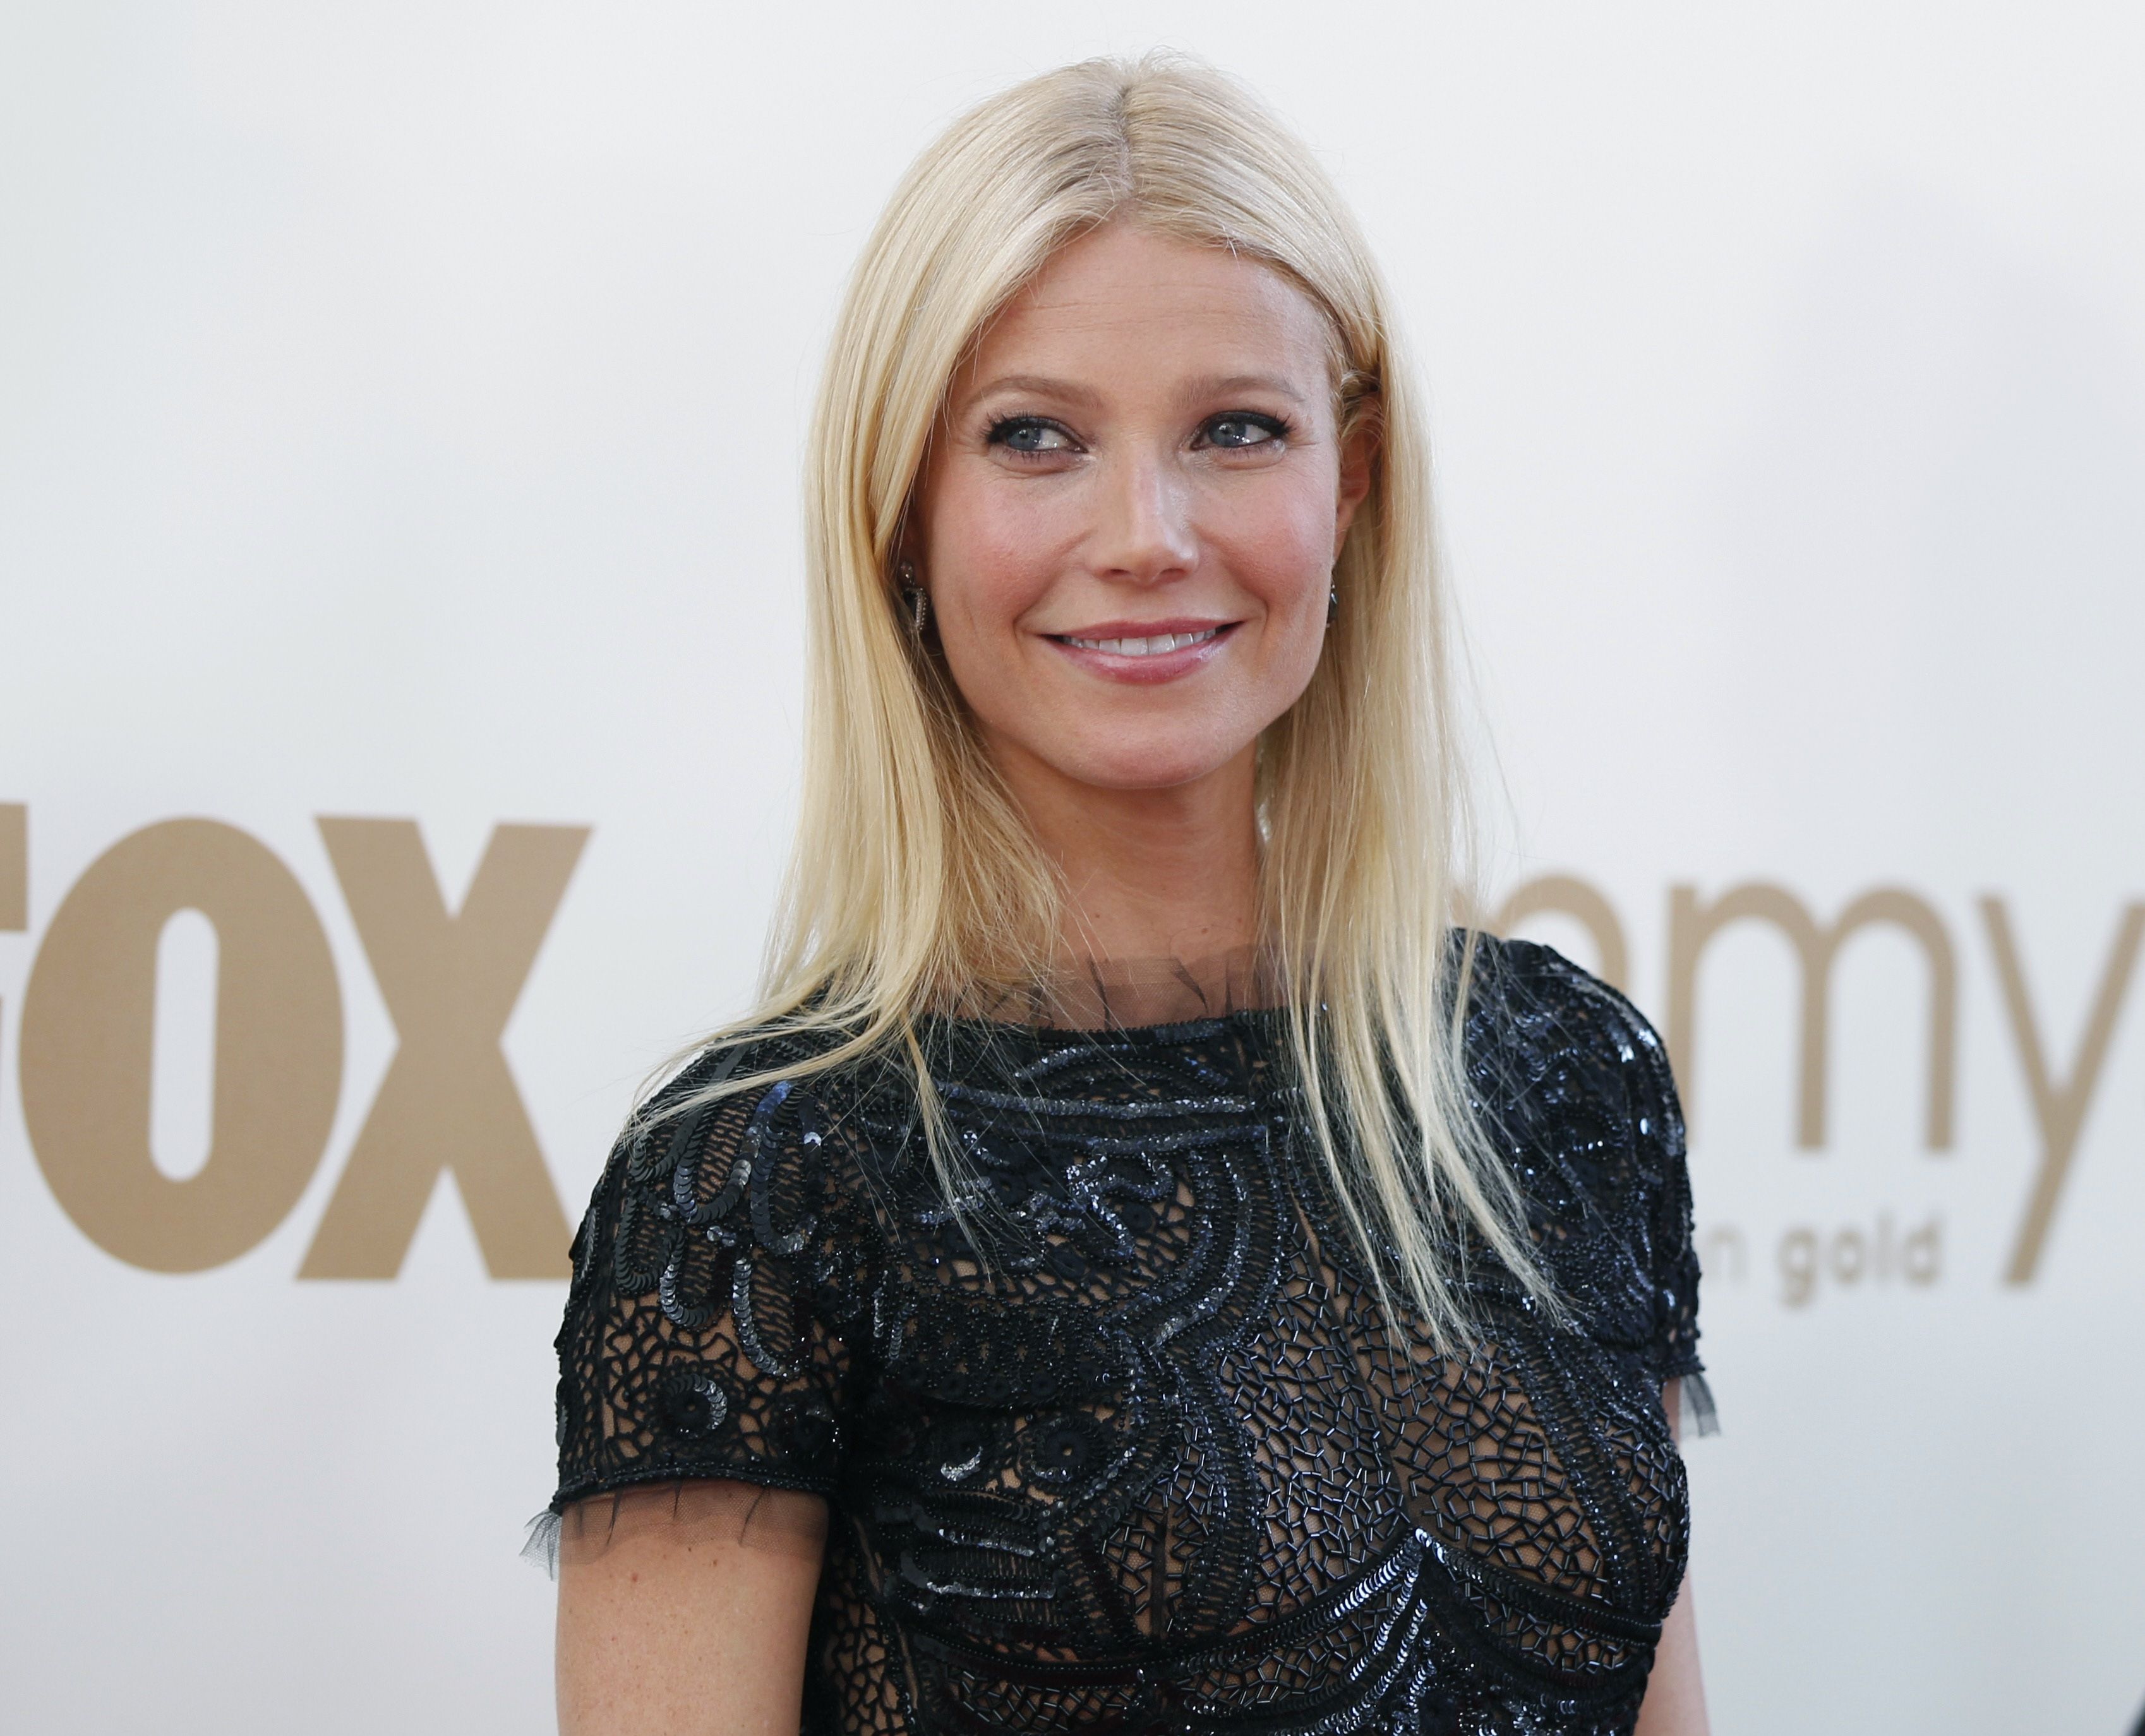 Gwyneth Paltrow Backgrounds, Compatible - PC, Mobile, Gadgets| 3396x2749 px